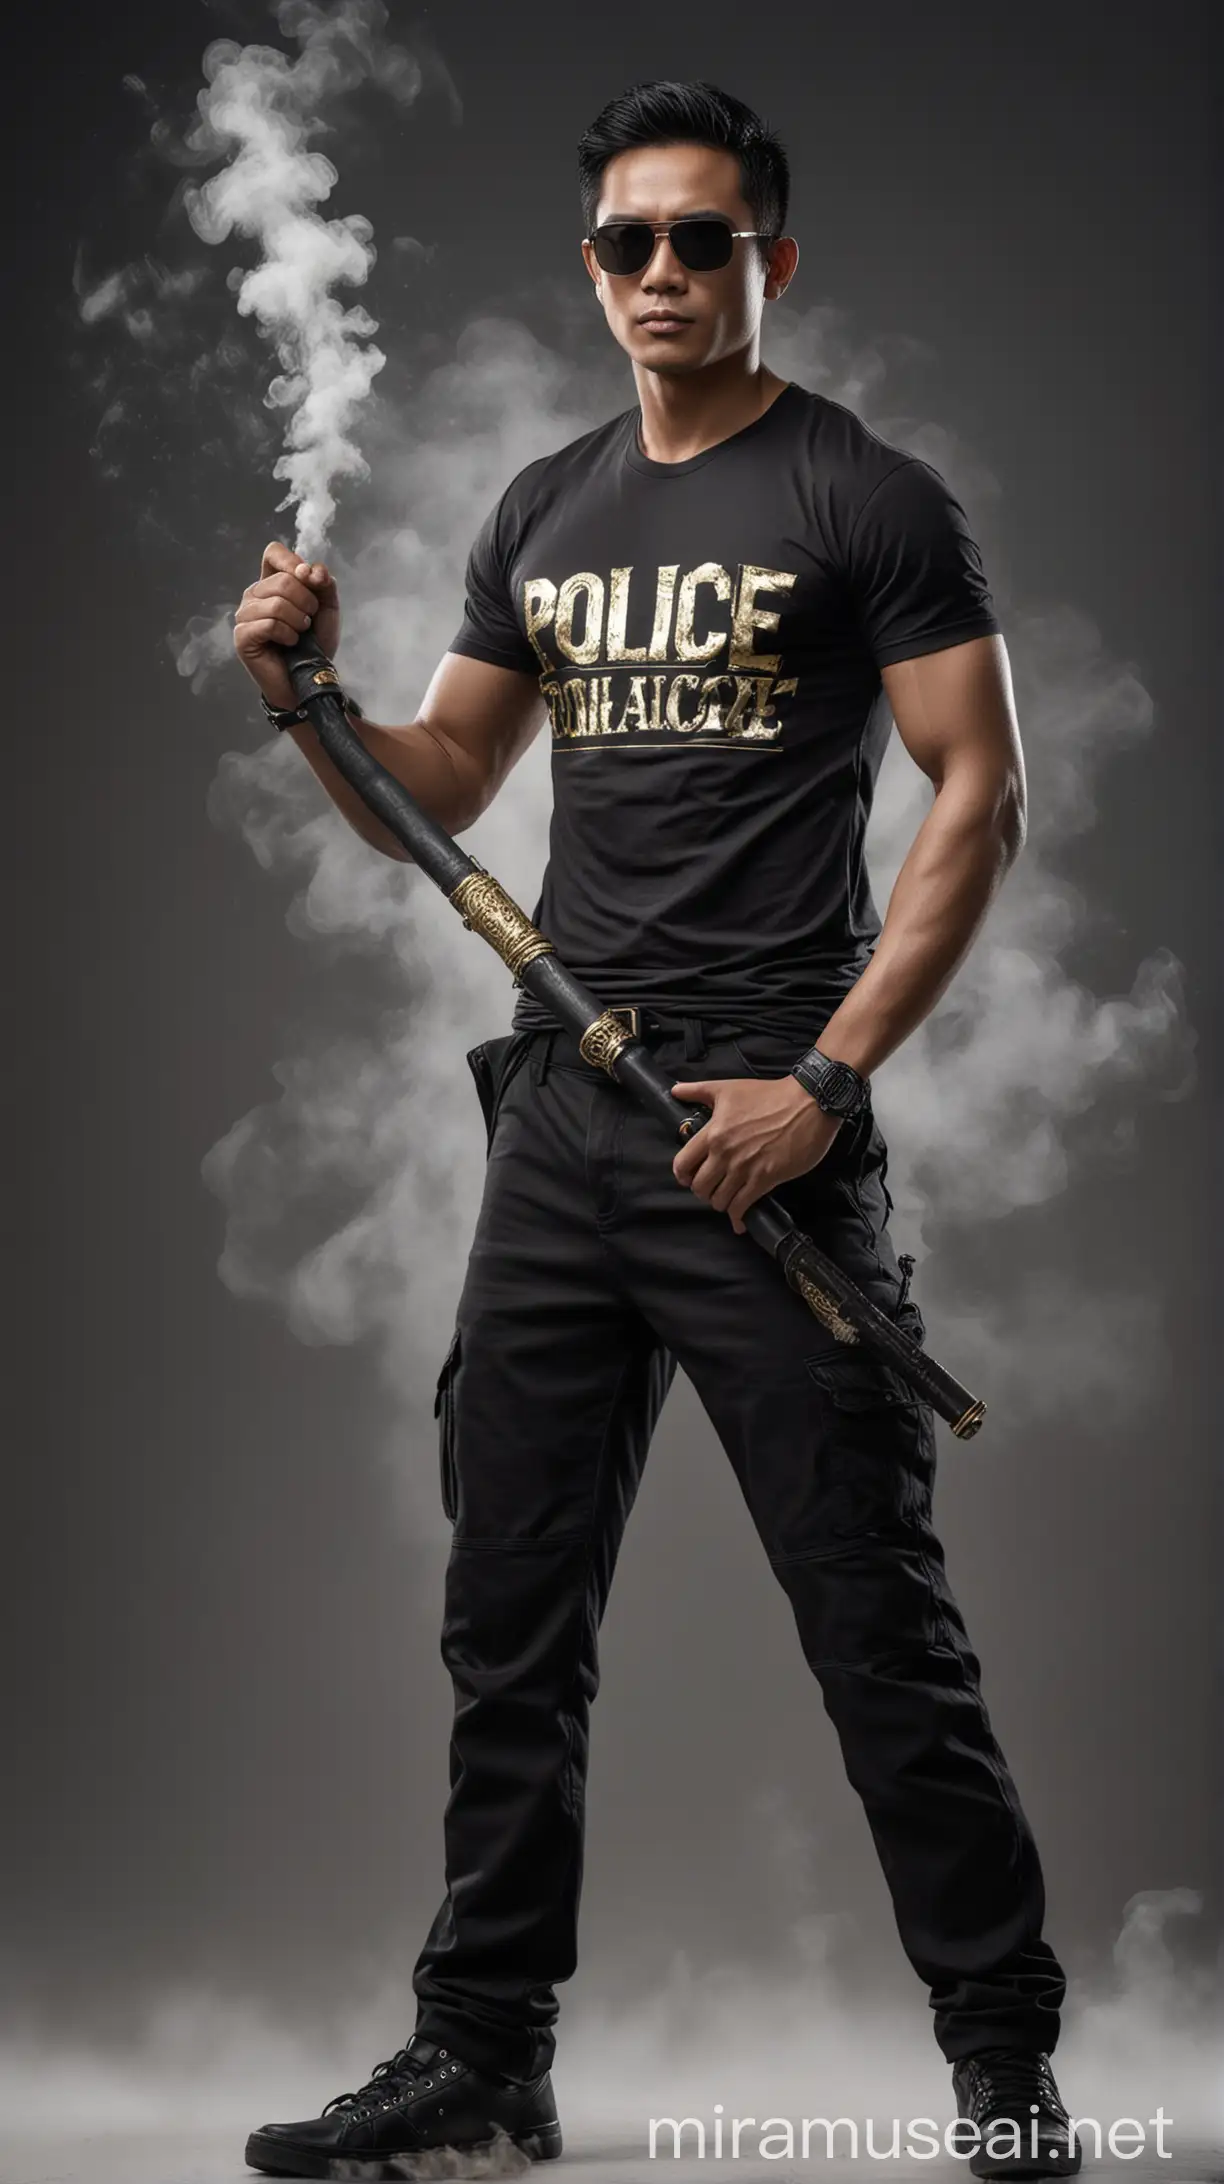 Handsome Indonesian Man in Police TShirt Poses with Iron Baton in Thick Smoke